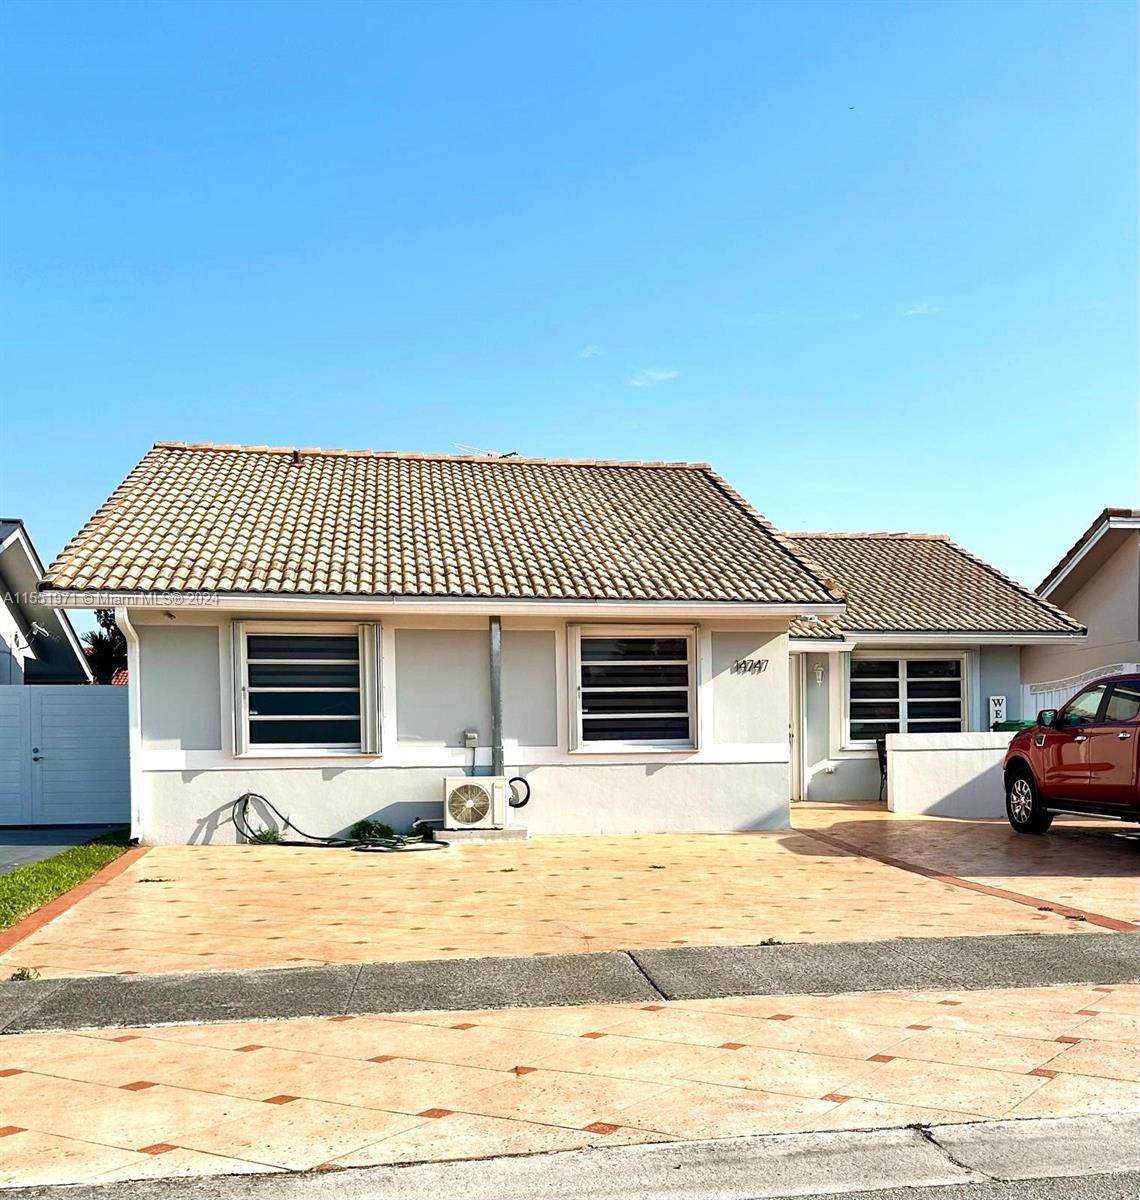 14747 Sw 82nd St St, Miami, Broward County, Florida - 3 Bedrooms  
2 Bathrooms - 